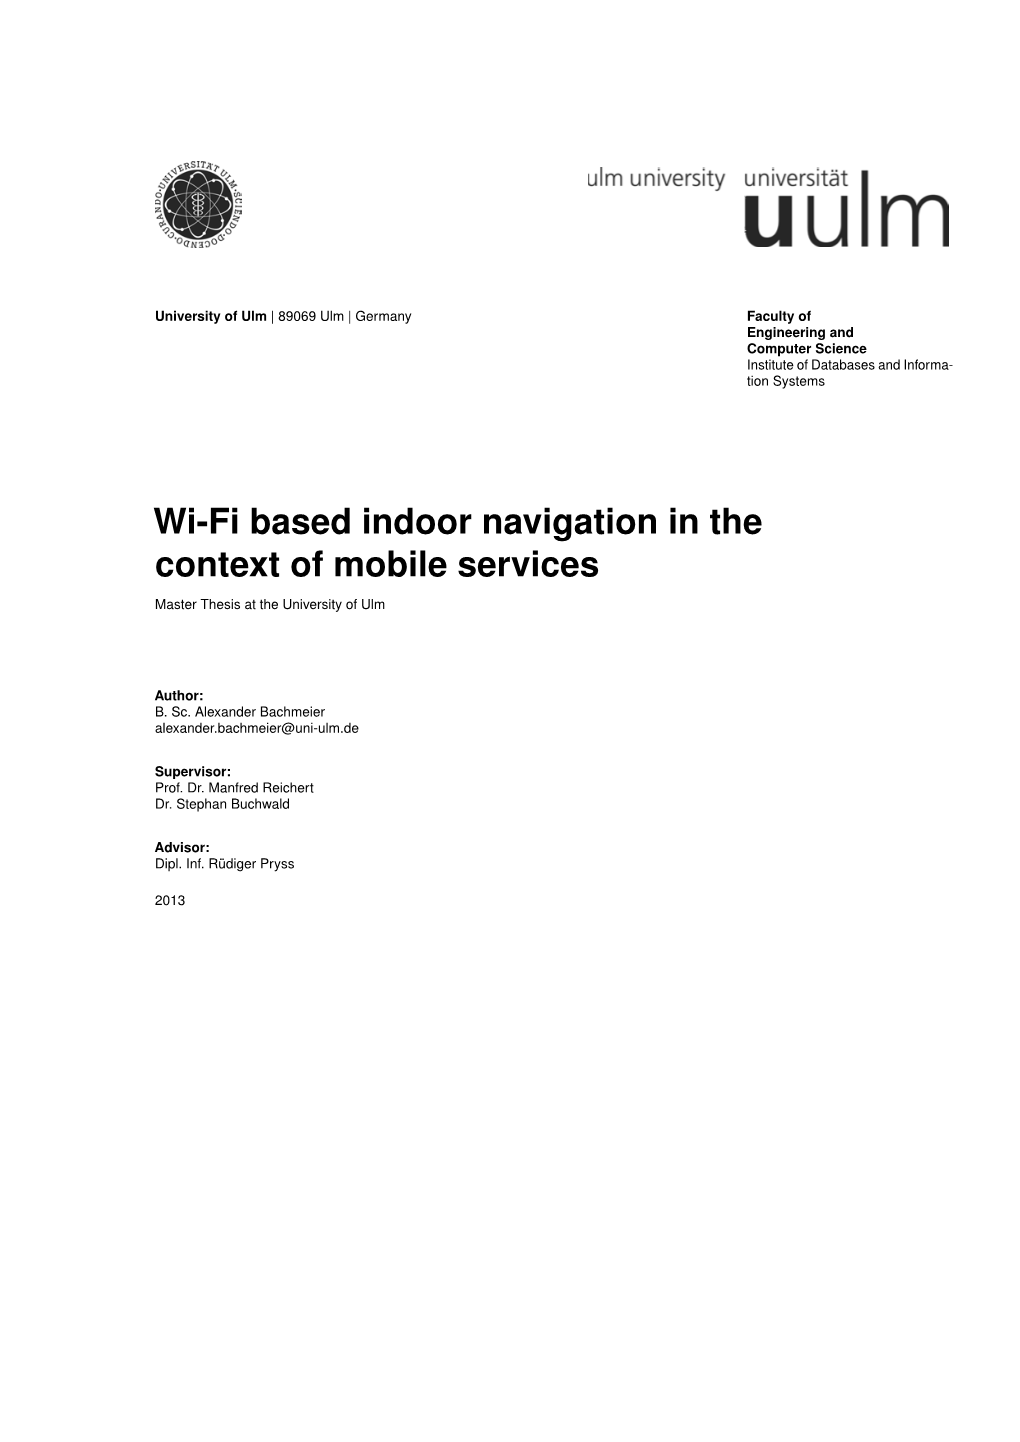 Wi-Fi Based Indoor Navigation in the Context of Mobile Services